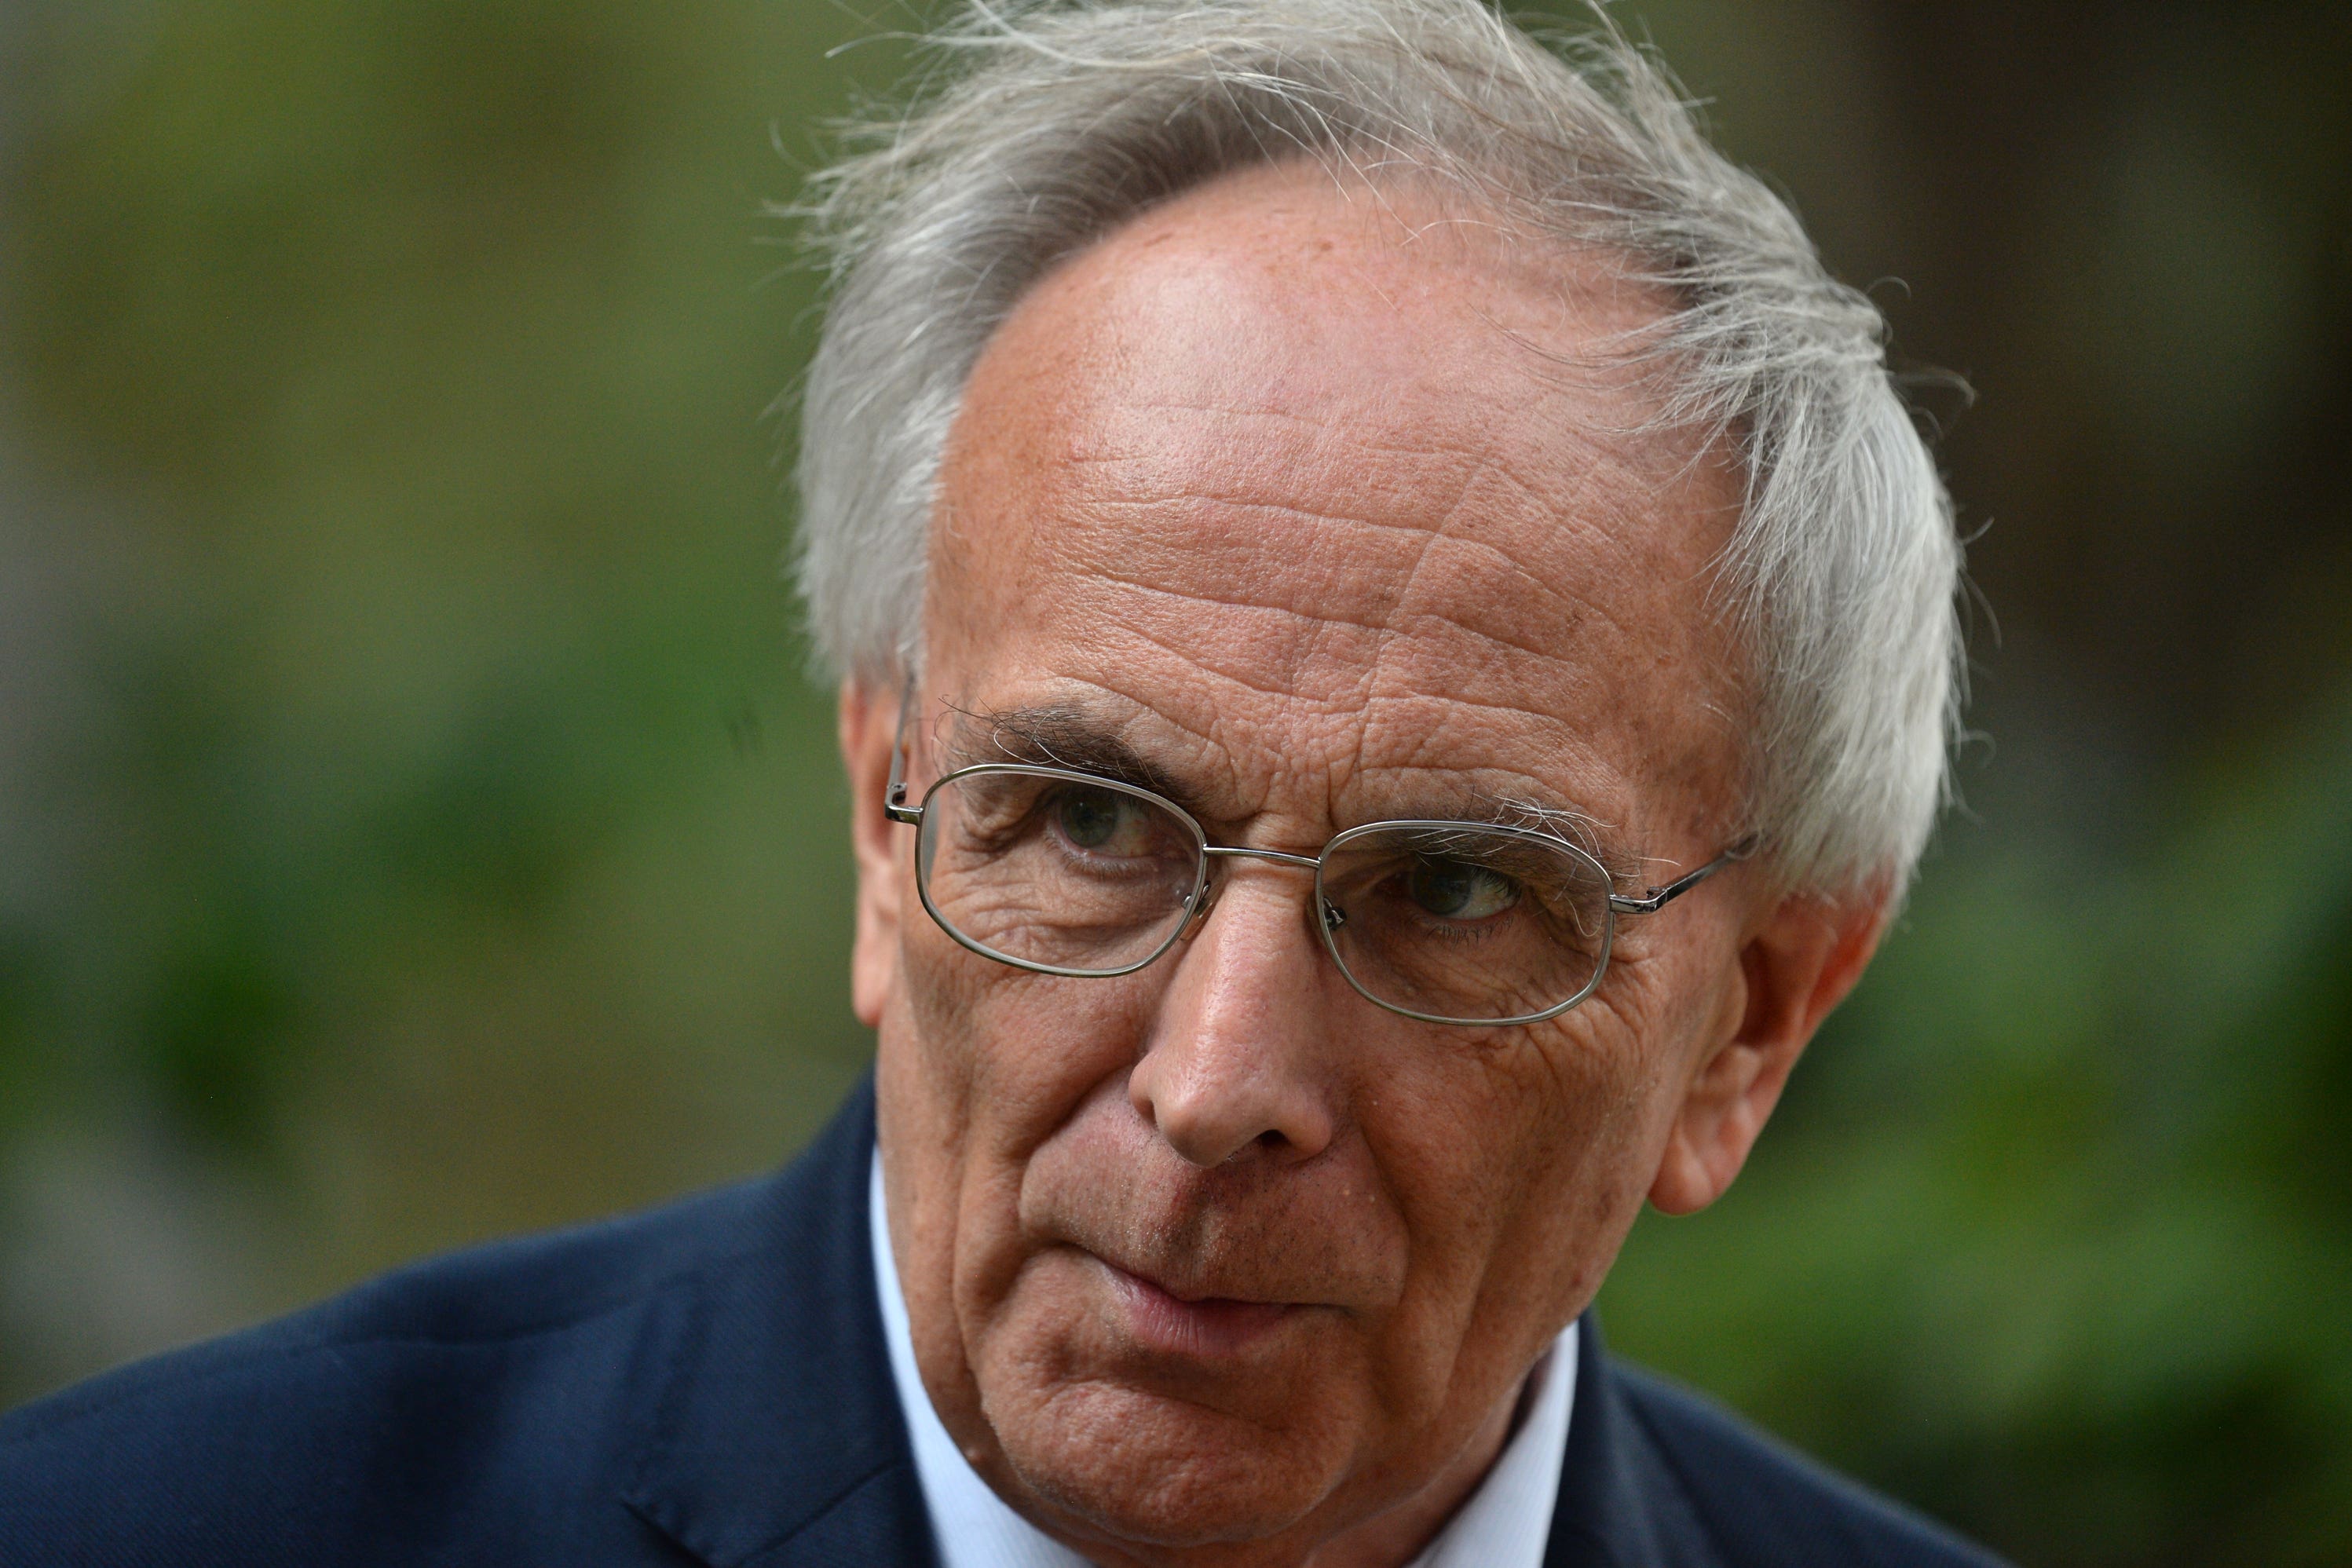 MPs backed the suspension of Peter Bone